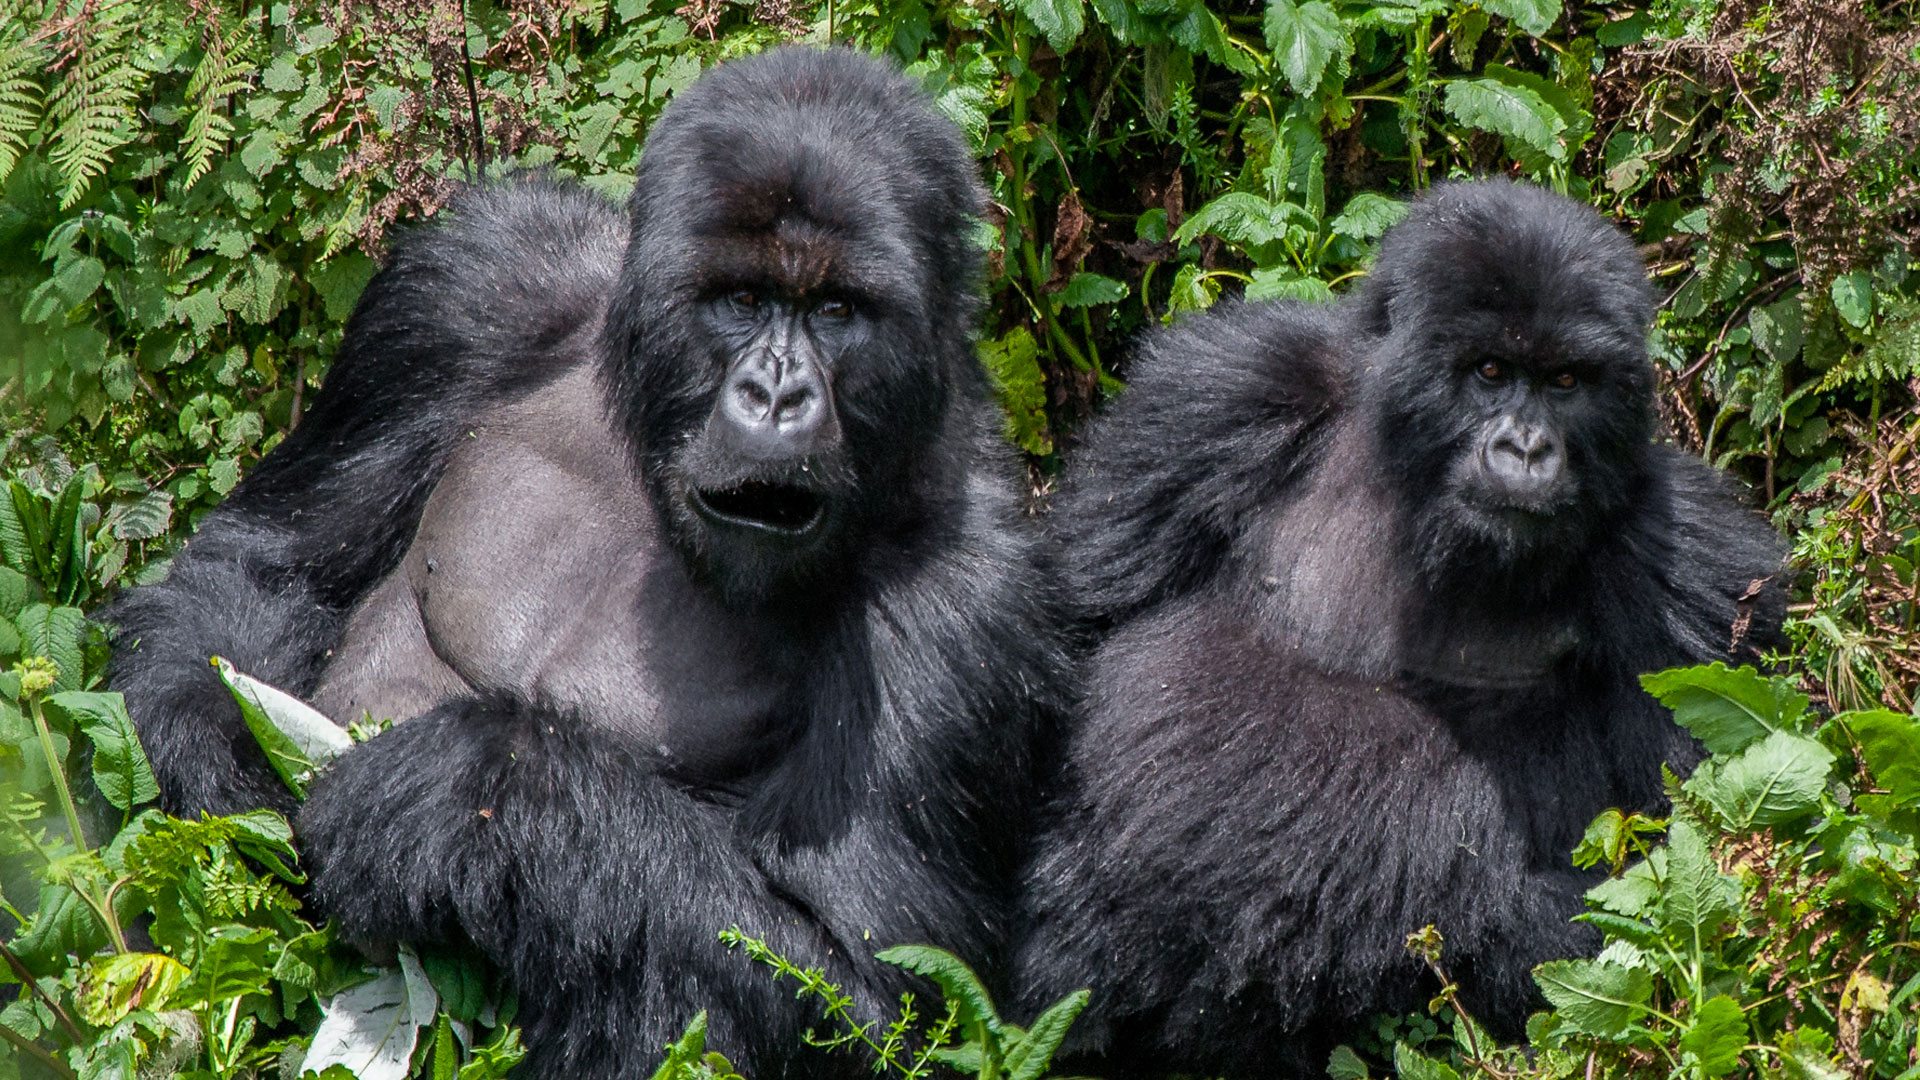 How To Get To Bwindi Impenetrable National Park